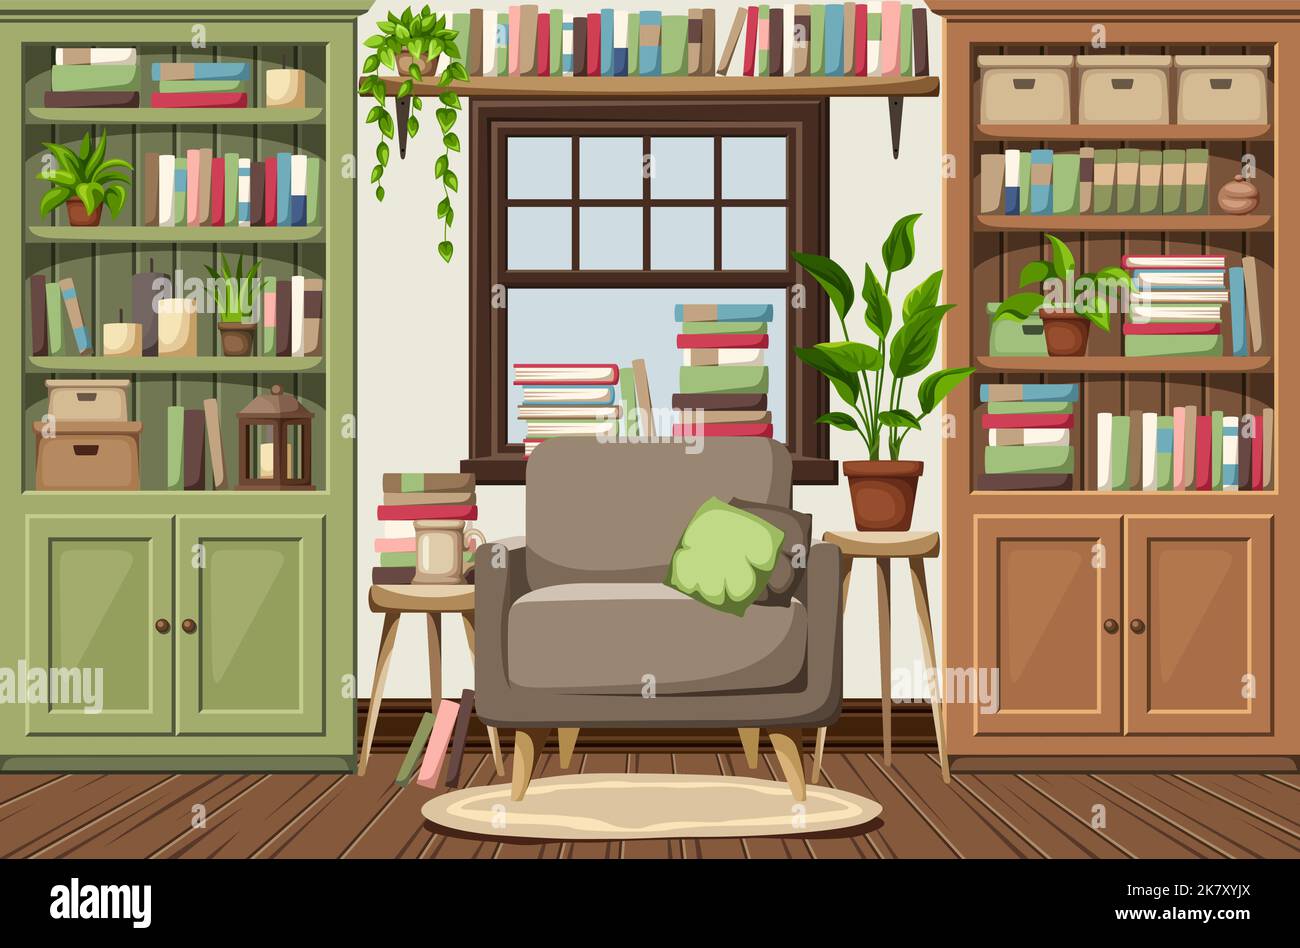 Room interior with green and brown bookcases, an armchair, and plenty of books and houseplants. Cozy old-fashioned classic interior design. Cartoon ve Stock Vector